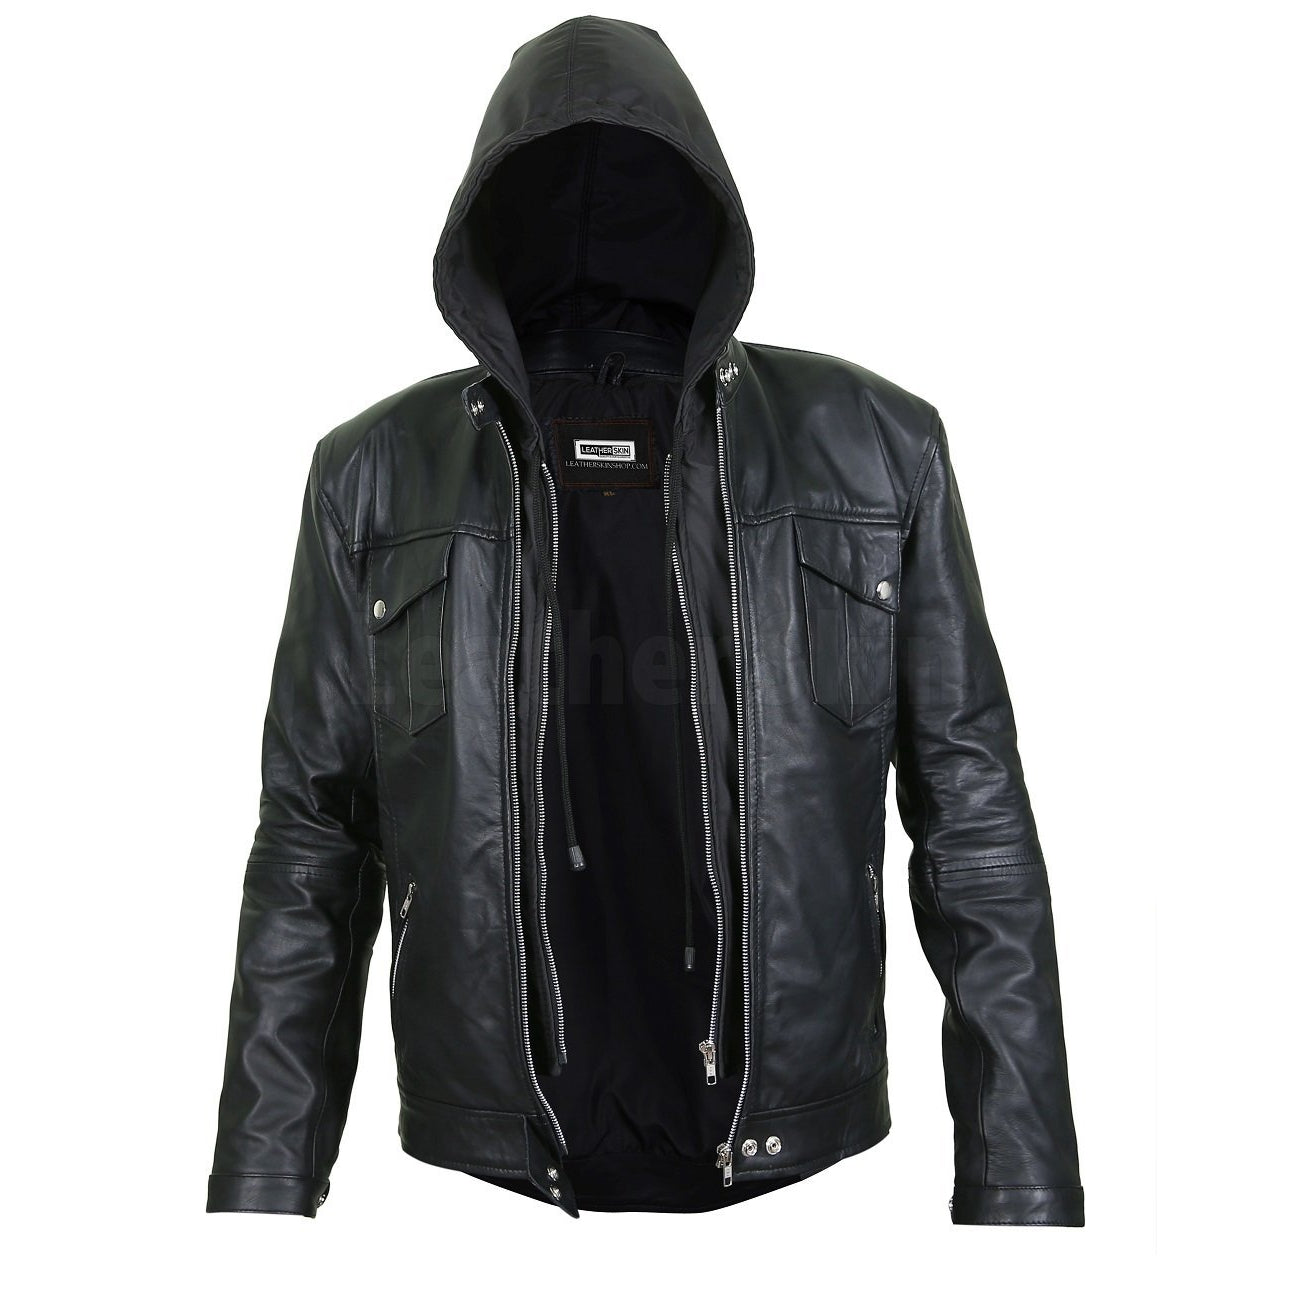 Men’s Black Leather Jacket with Hoodie - Leather Skin Shop